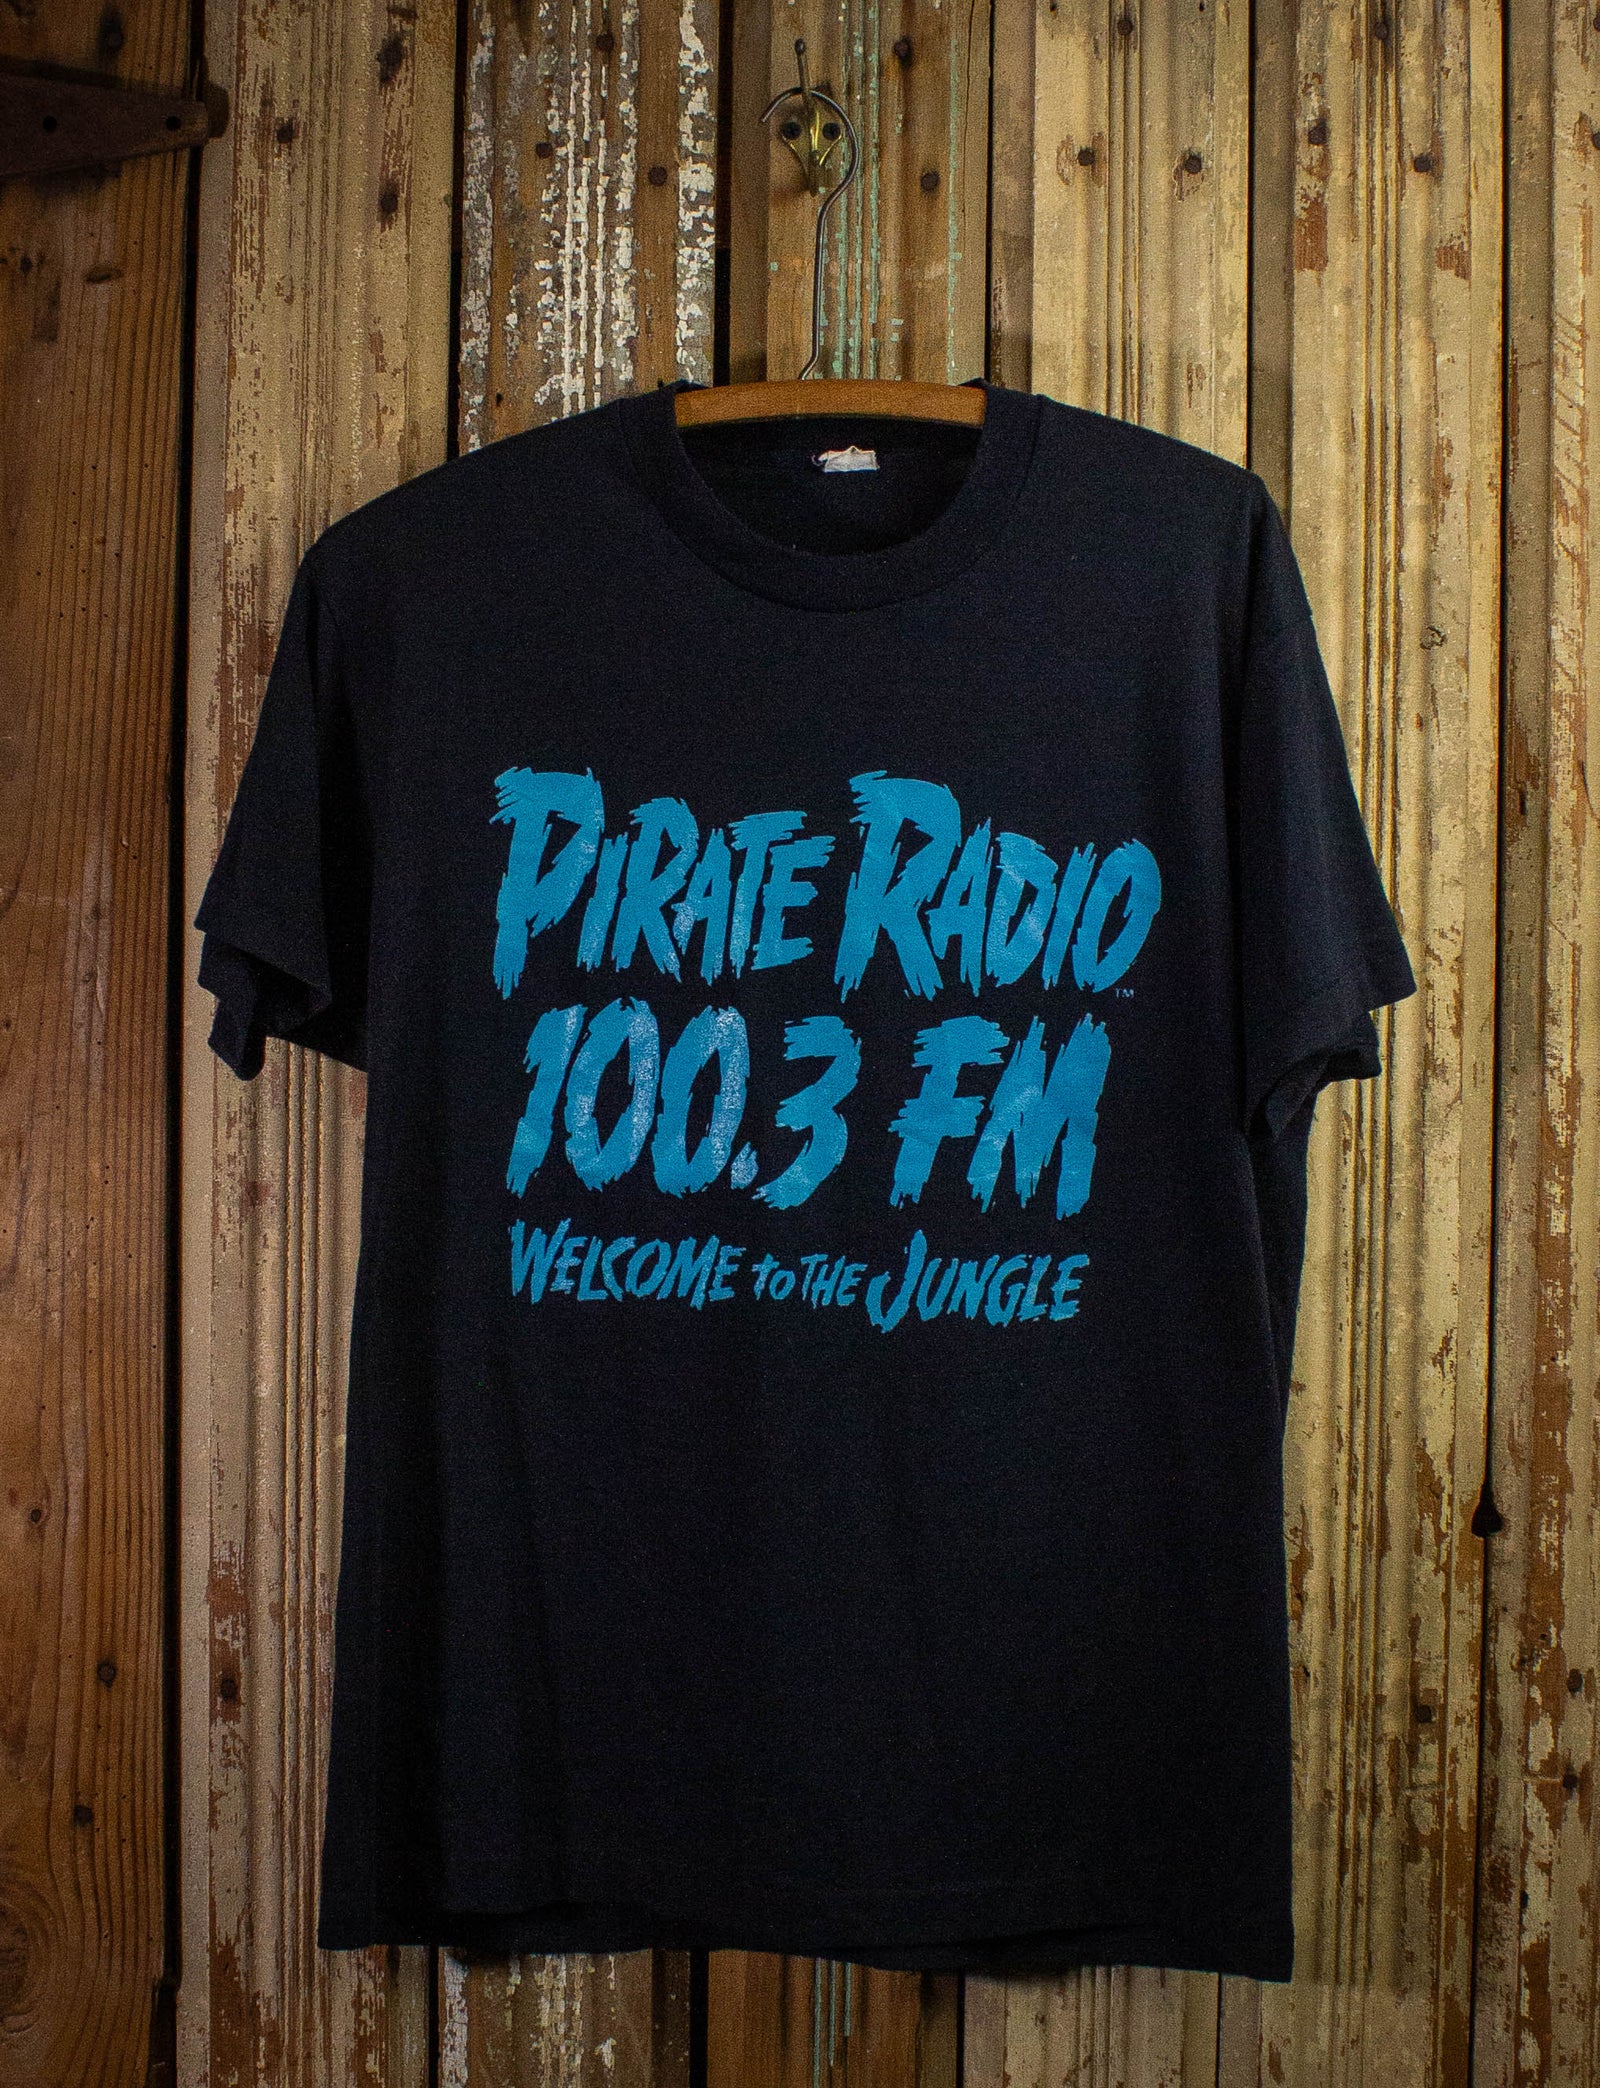 Vintage Pirate Radio Welcome to the Jungle Graphic T Shirt 80s Black Large